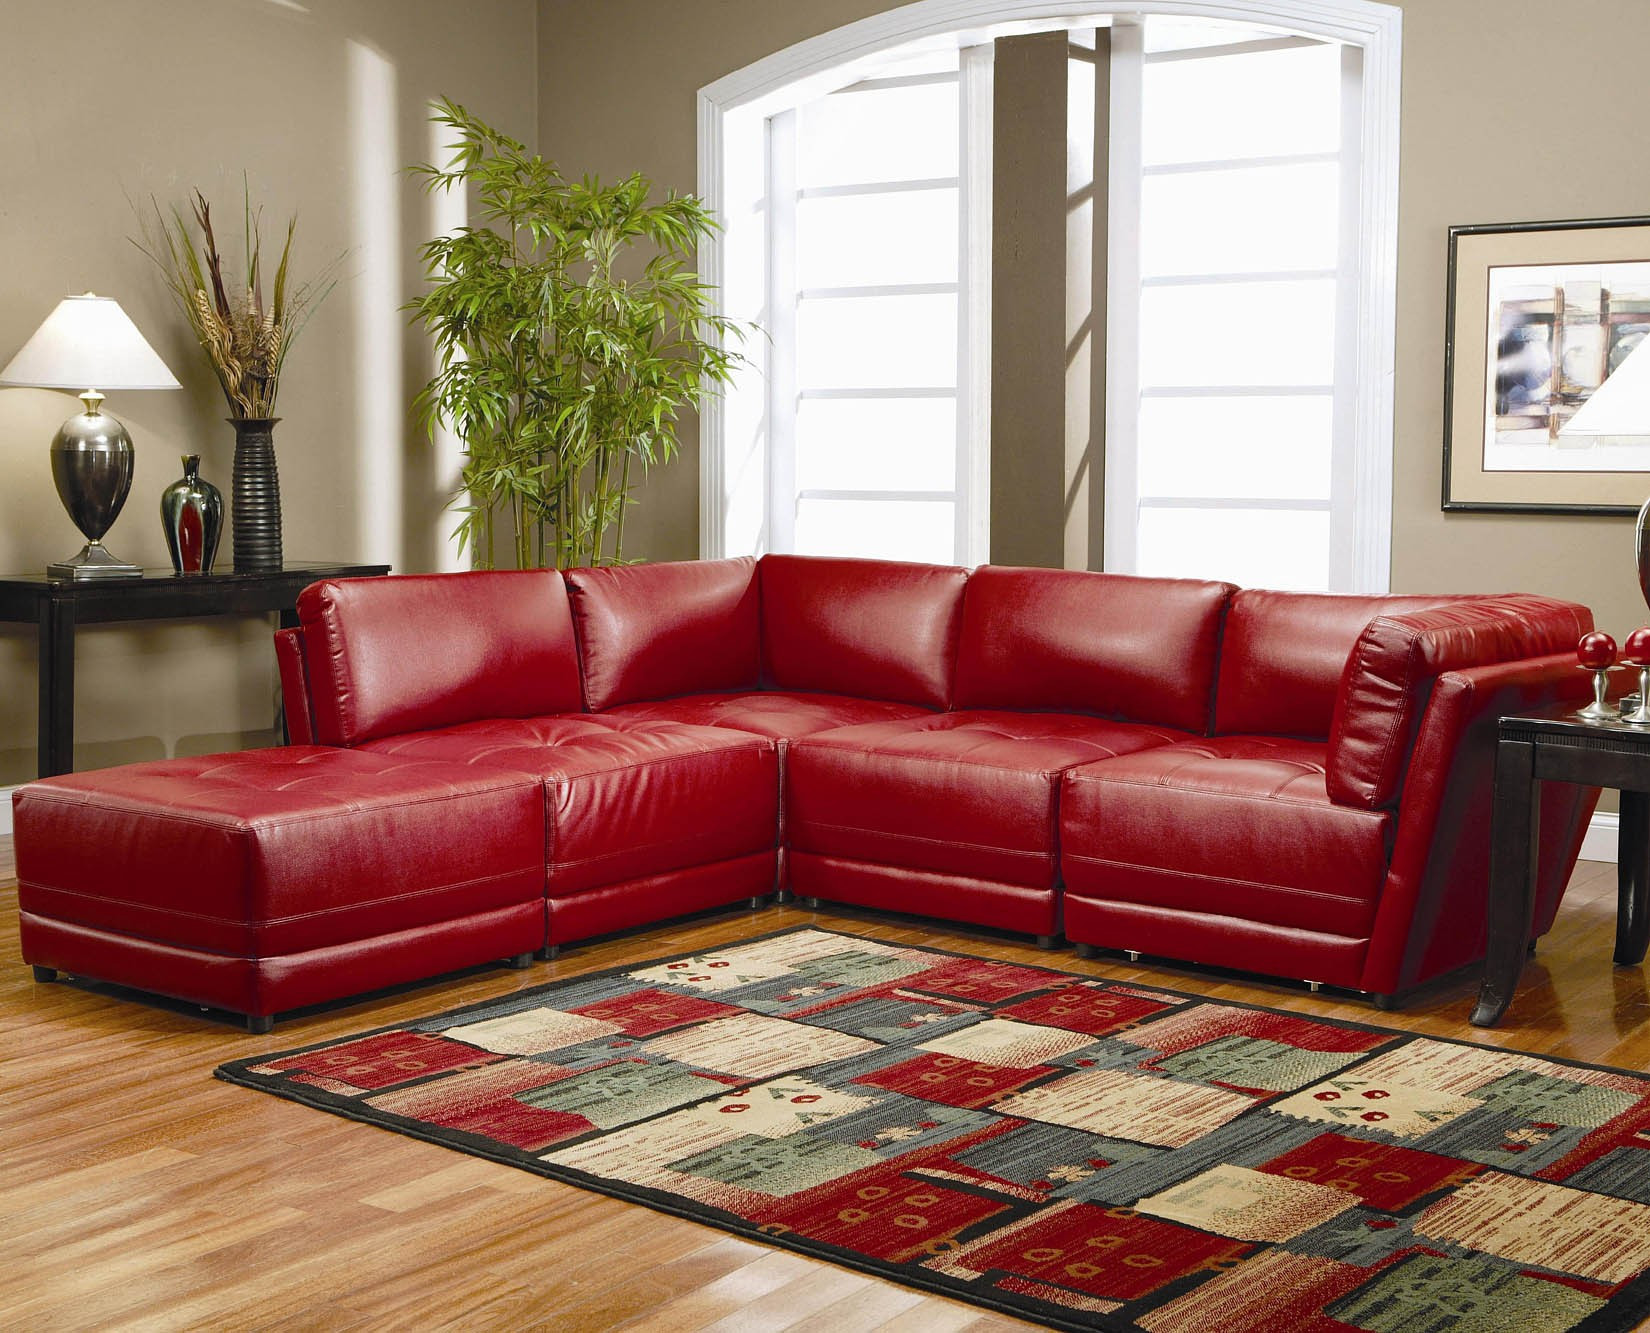 Red Couch Living Room Ideas
 Attractive Red Leather Sofa for Interior Living Room